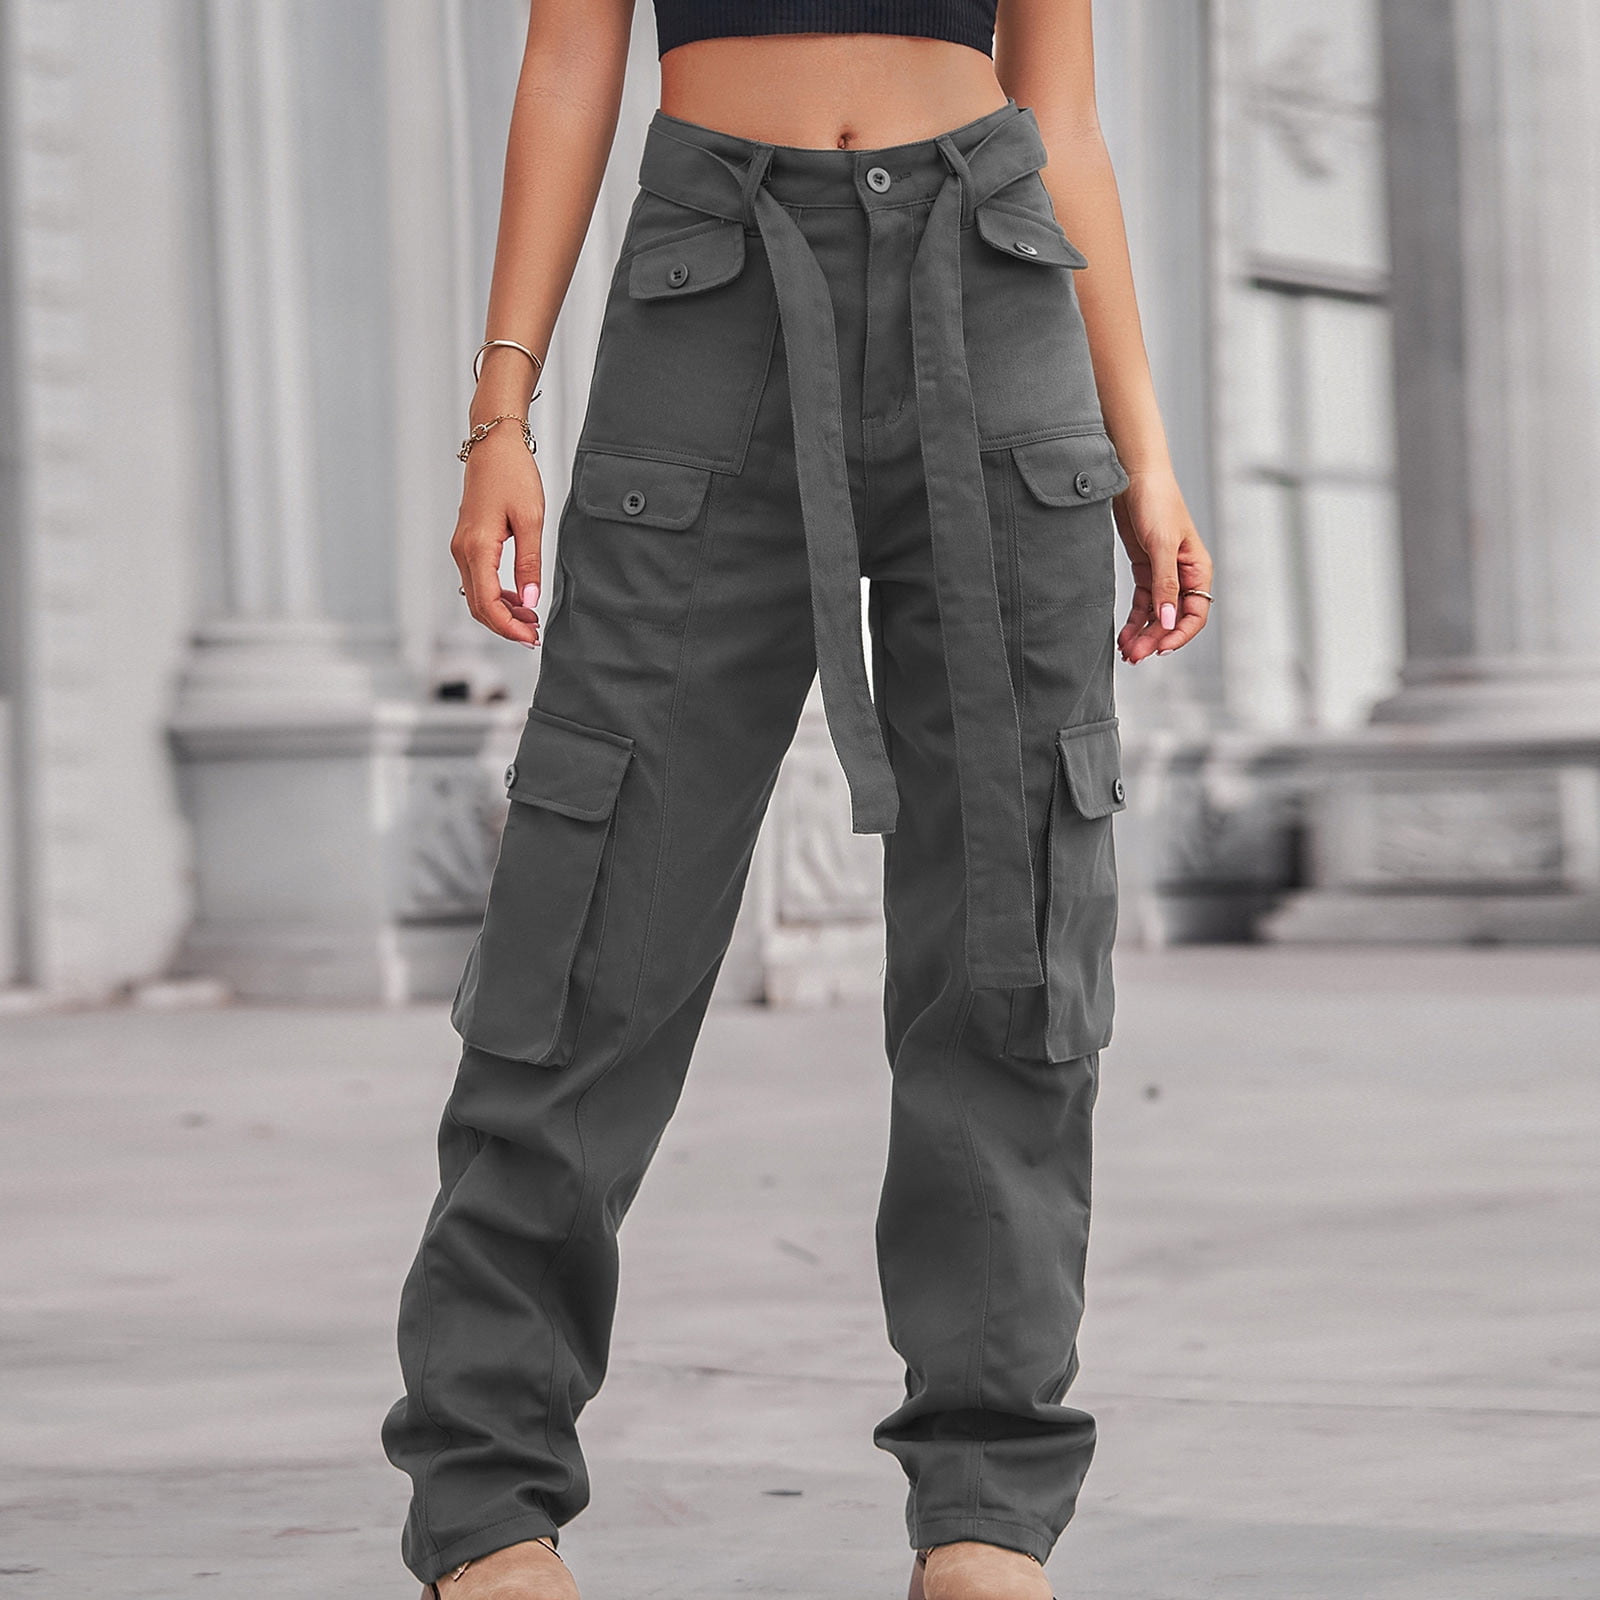 SELONE Cargo Pants Women With Pockets Denim Casual Long Pant Straight Leg  Solid Pants Hippie Punk Trousers Jogger Loose Overalls s for Everyday Wear